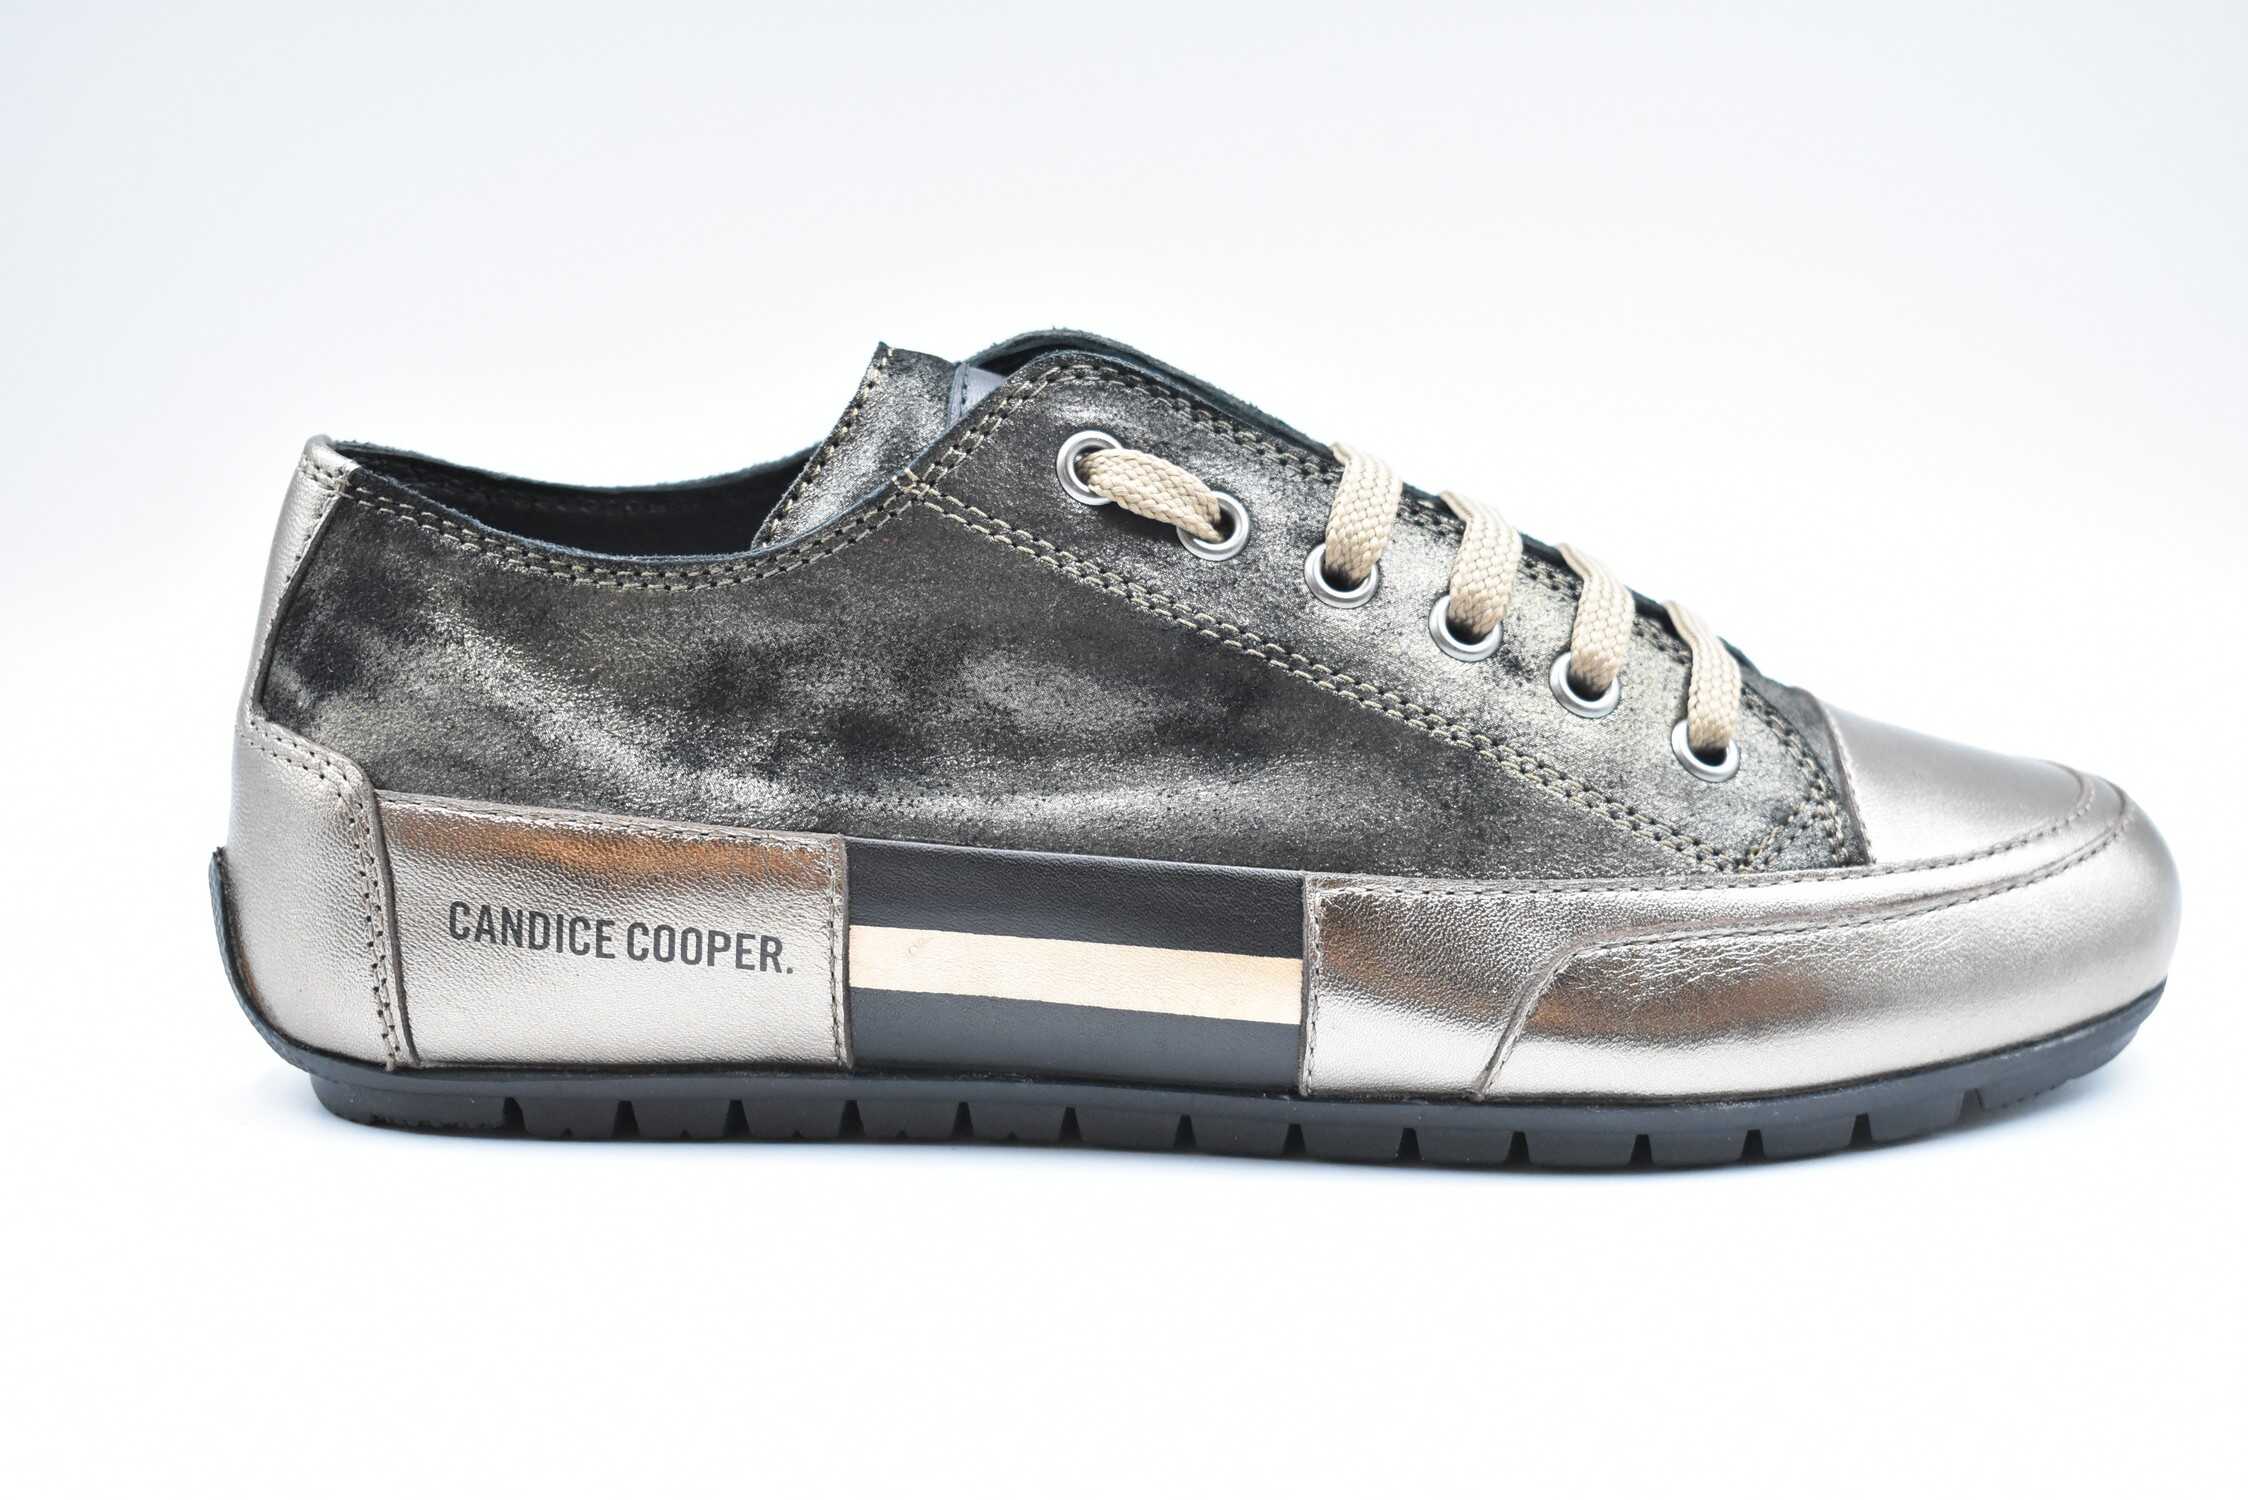 CANDICE COOPER Candice Cooper Flat Shoes N/A